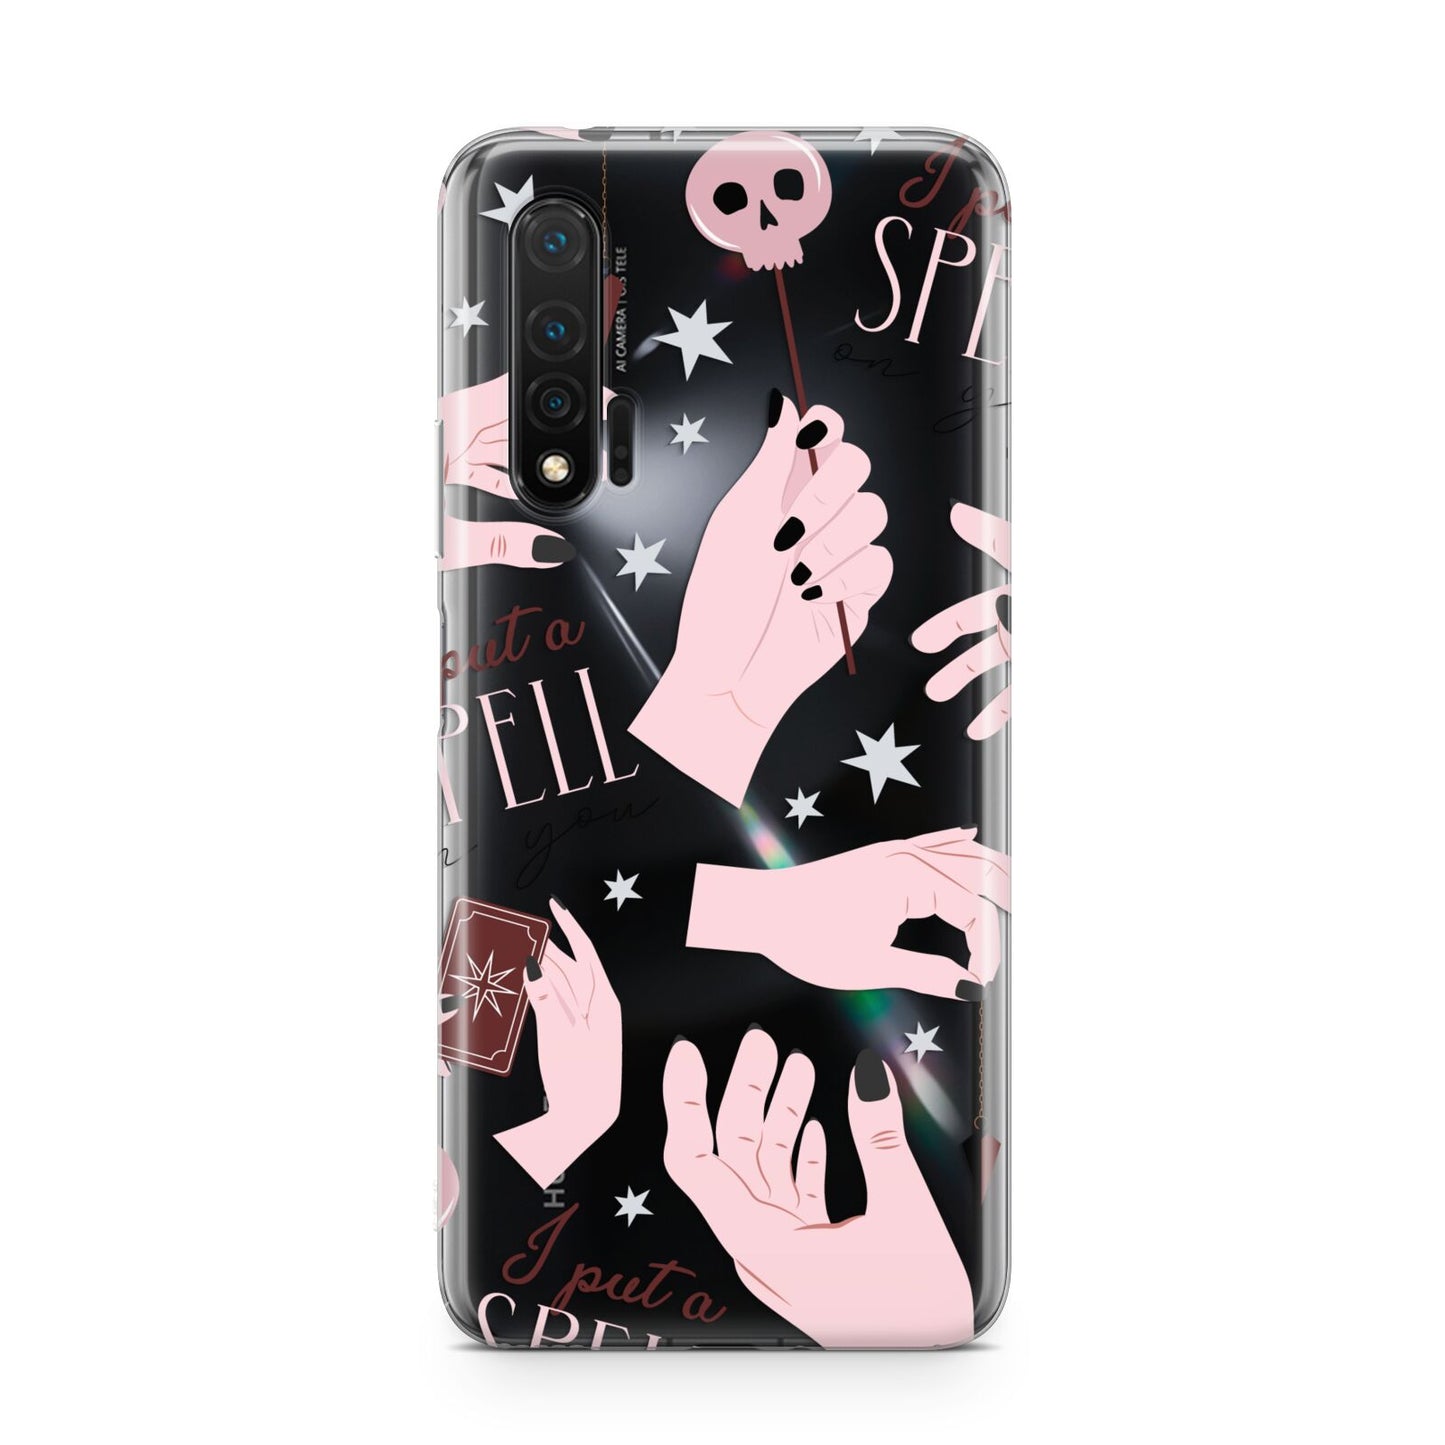 Witches Hands and Tarot Cards Huawei Nova 6 Phone Case